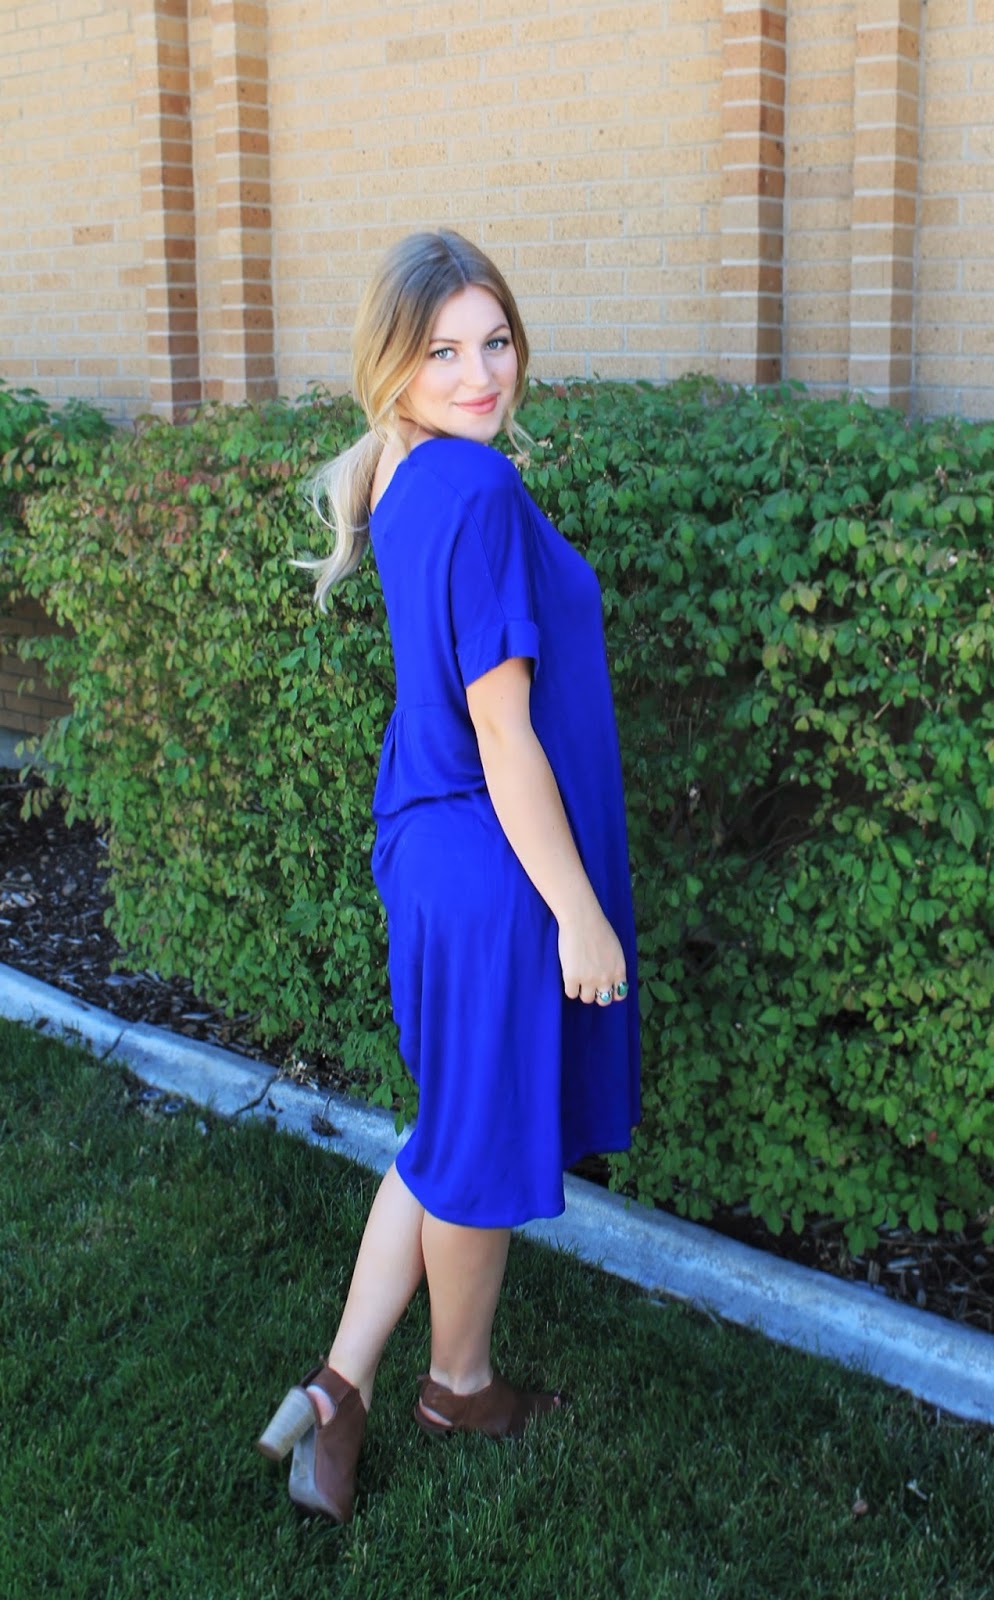 brittany anne dangerfield: cool blue + comfort